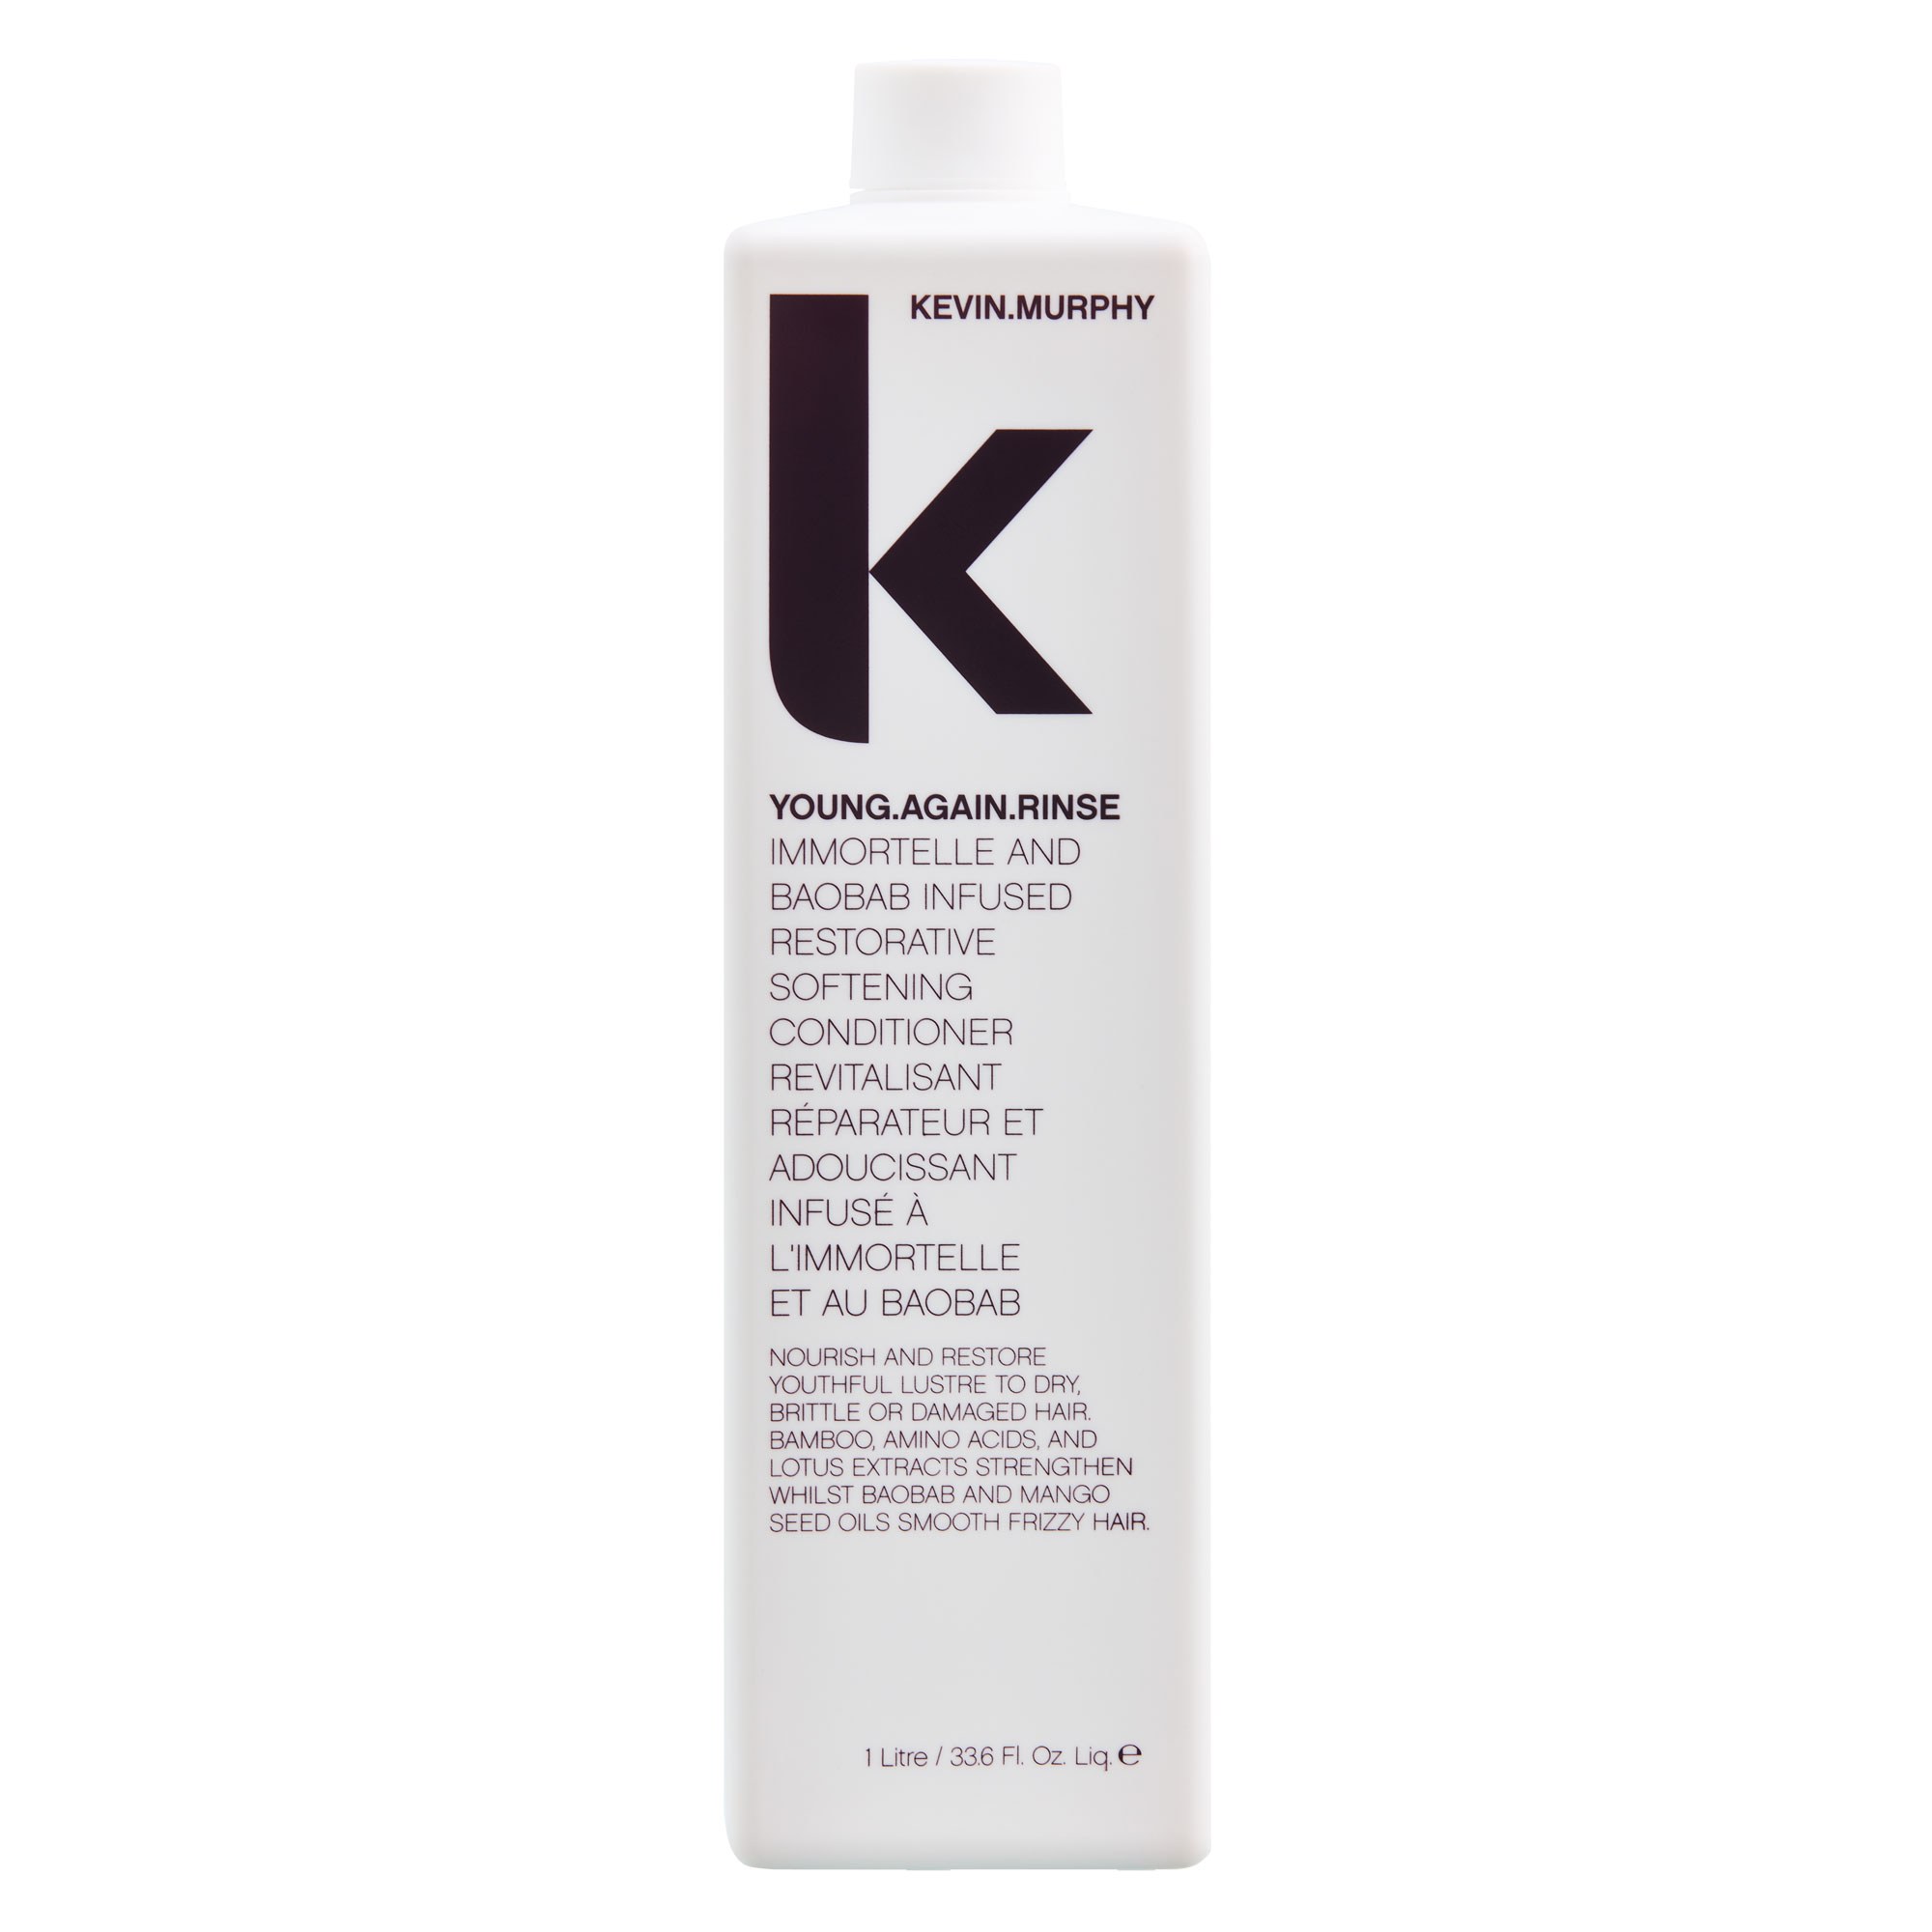 KEVIN.MURPHY YOUNG.AGAIN RINSE